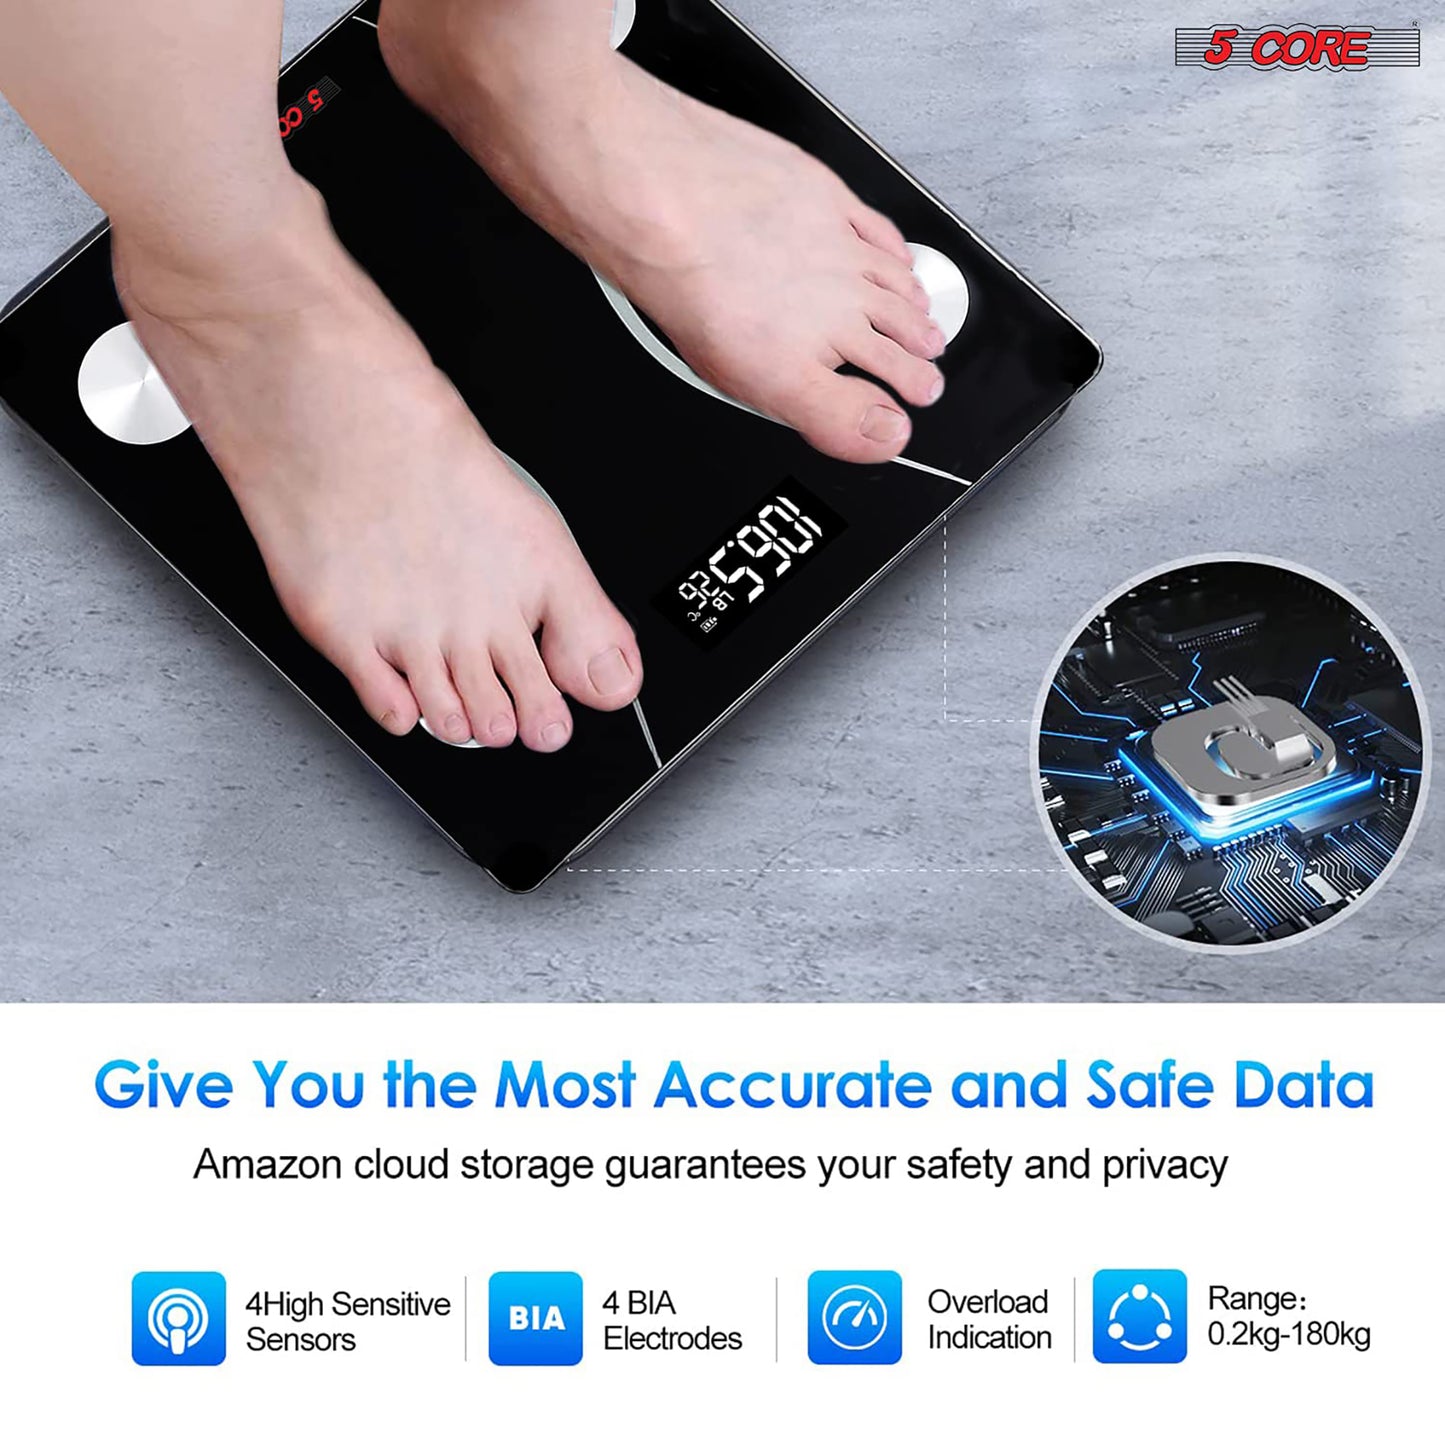 Kcubeinc Rechargeable Digital Scale for Body Weight, Precision Bathroom Weighing Bath Scale, Step-On Technology, High Capacity - 400 lbs. Large Display, Batteries Included BS 01 R BLK